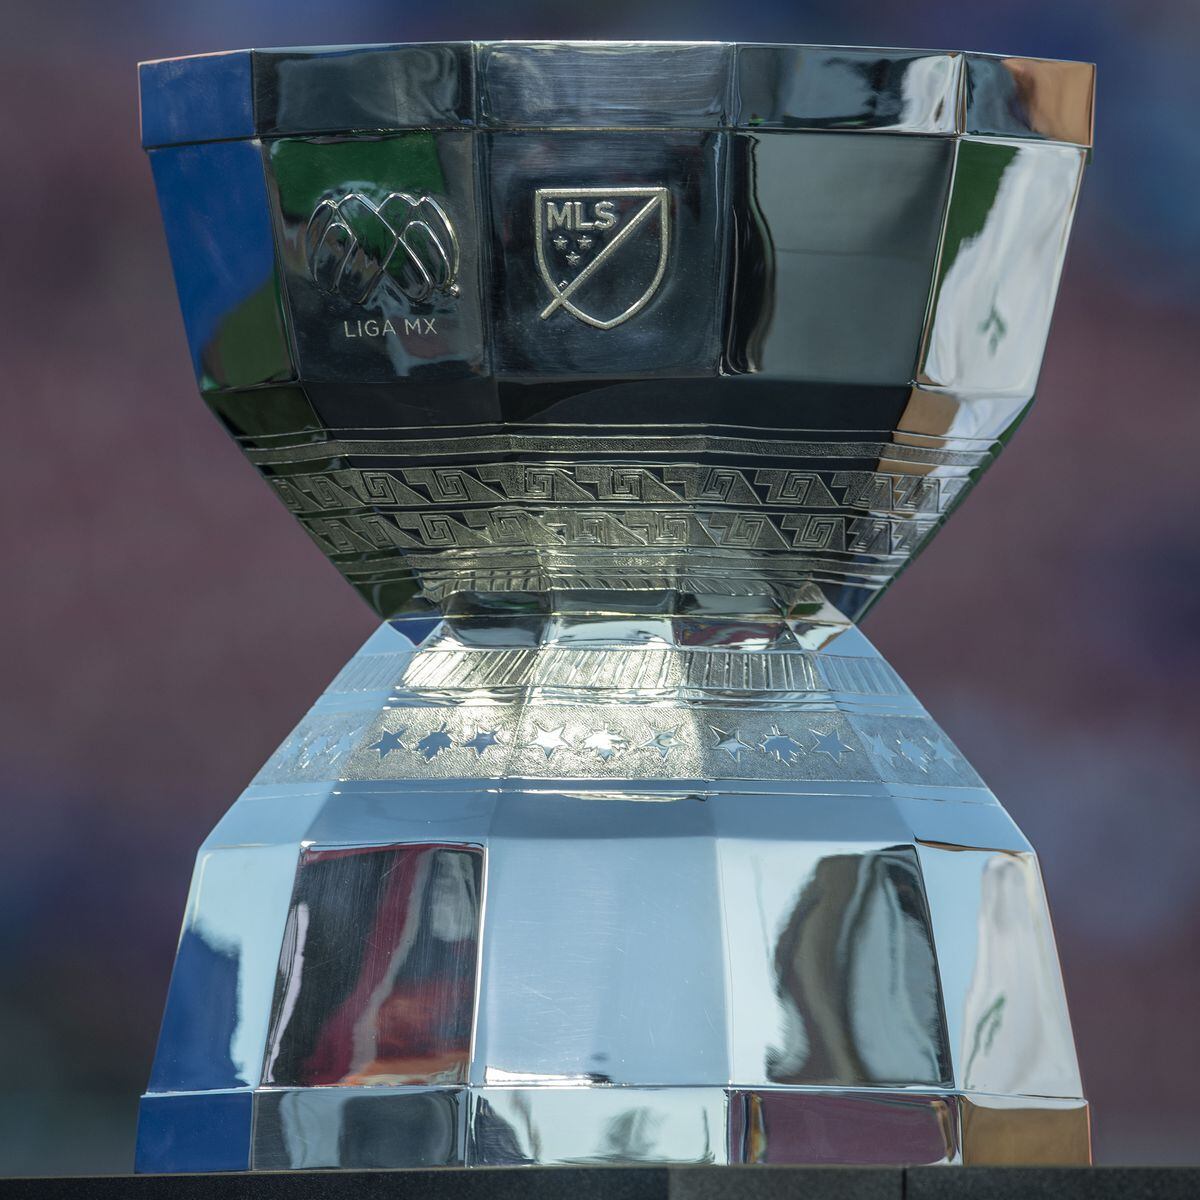 Leagues Cup 2023 Details Unveiled As MLS And LIGA MX Clubs Face